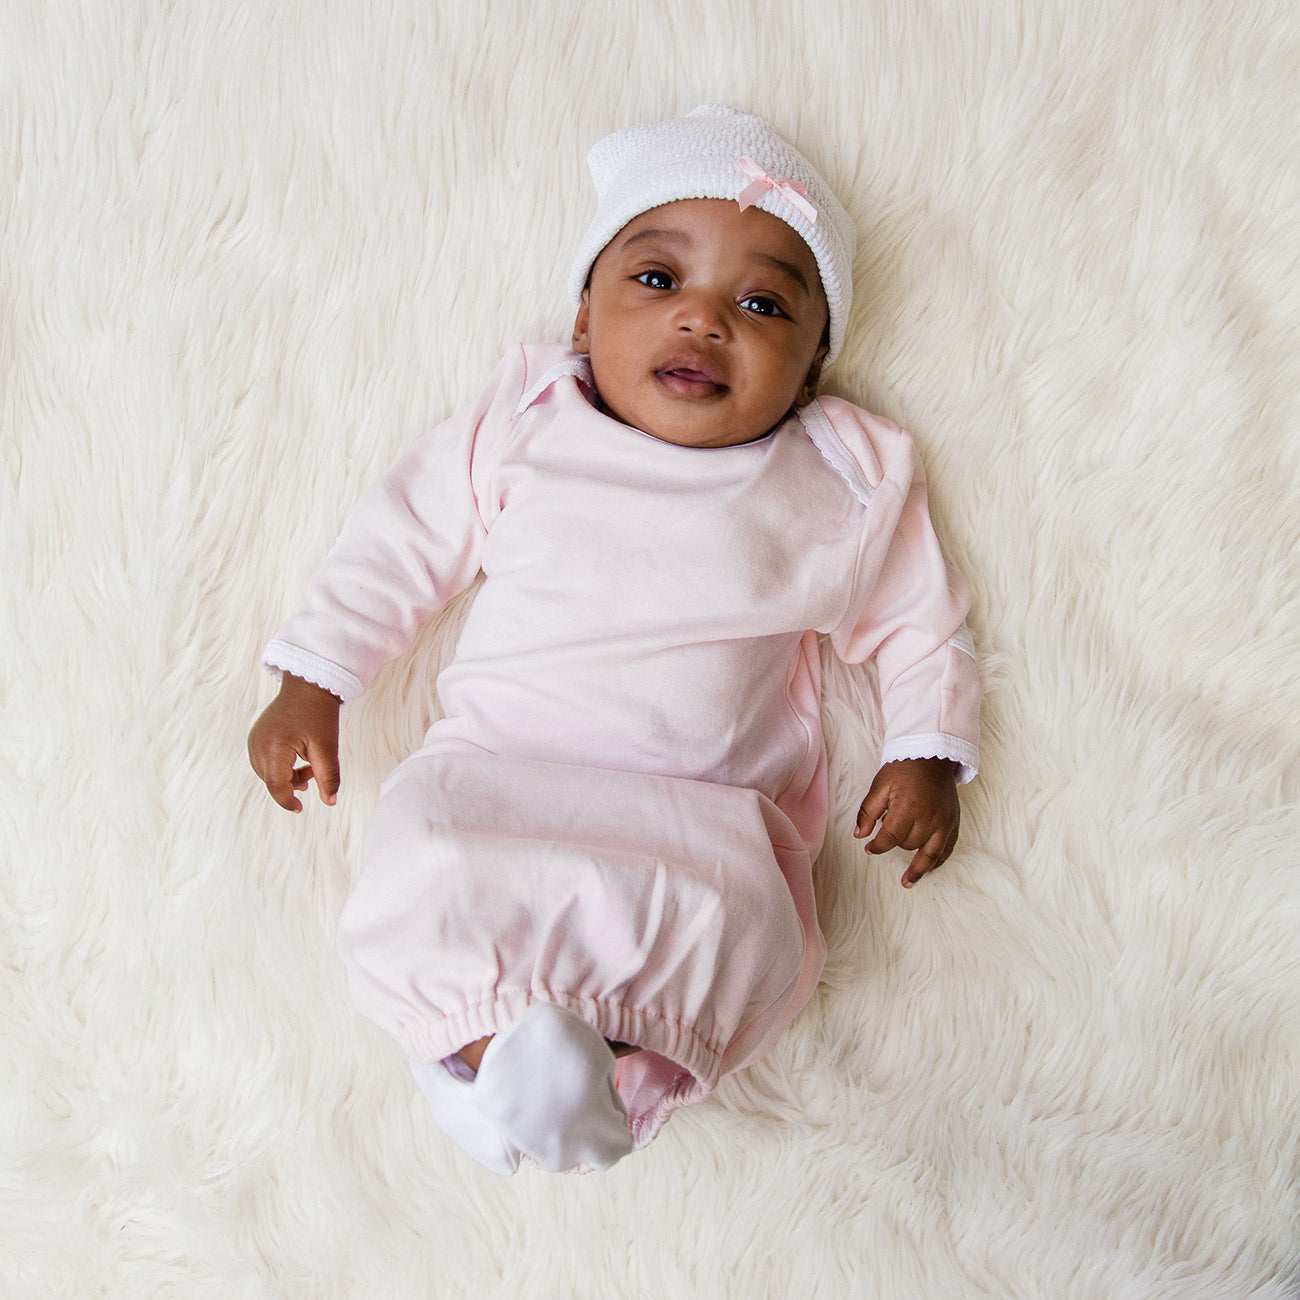 a baby in a pink Paty Knit Cap outfit laying on a white blanket from Paty.